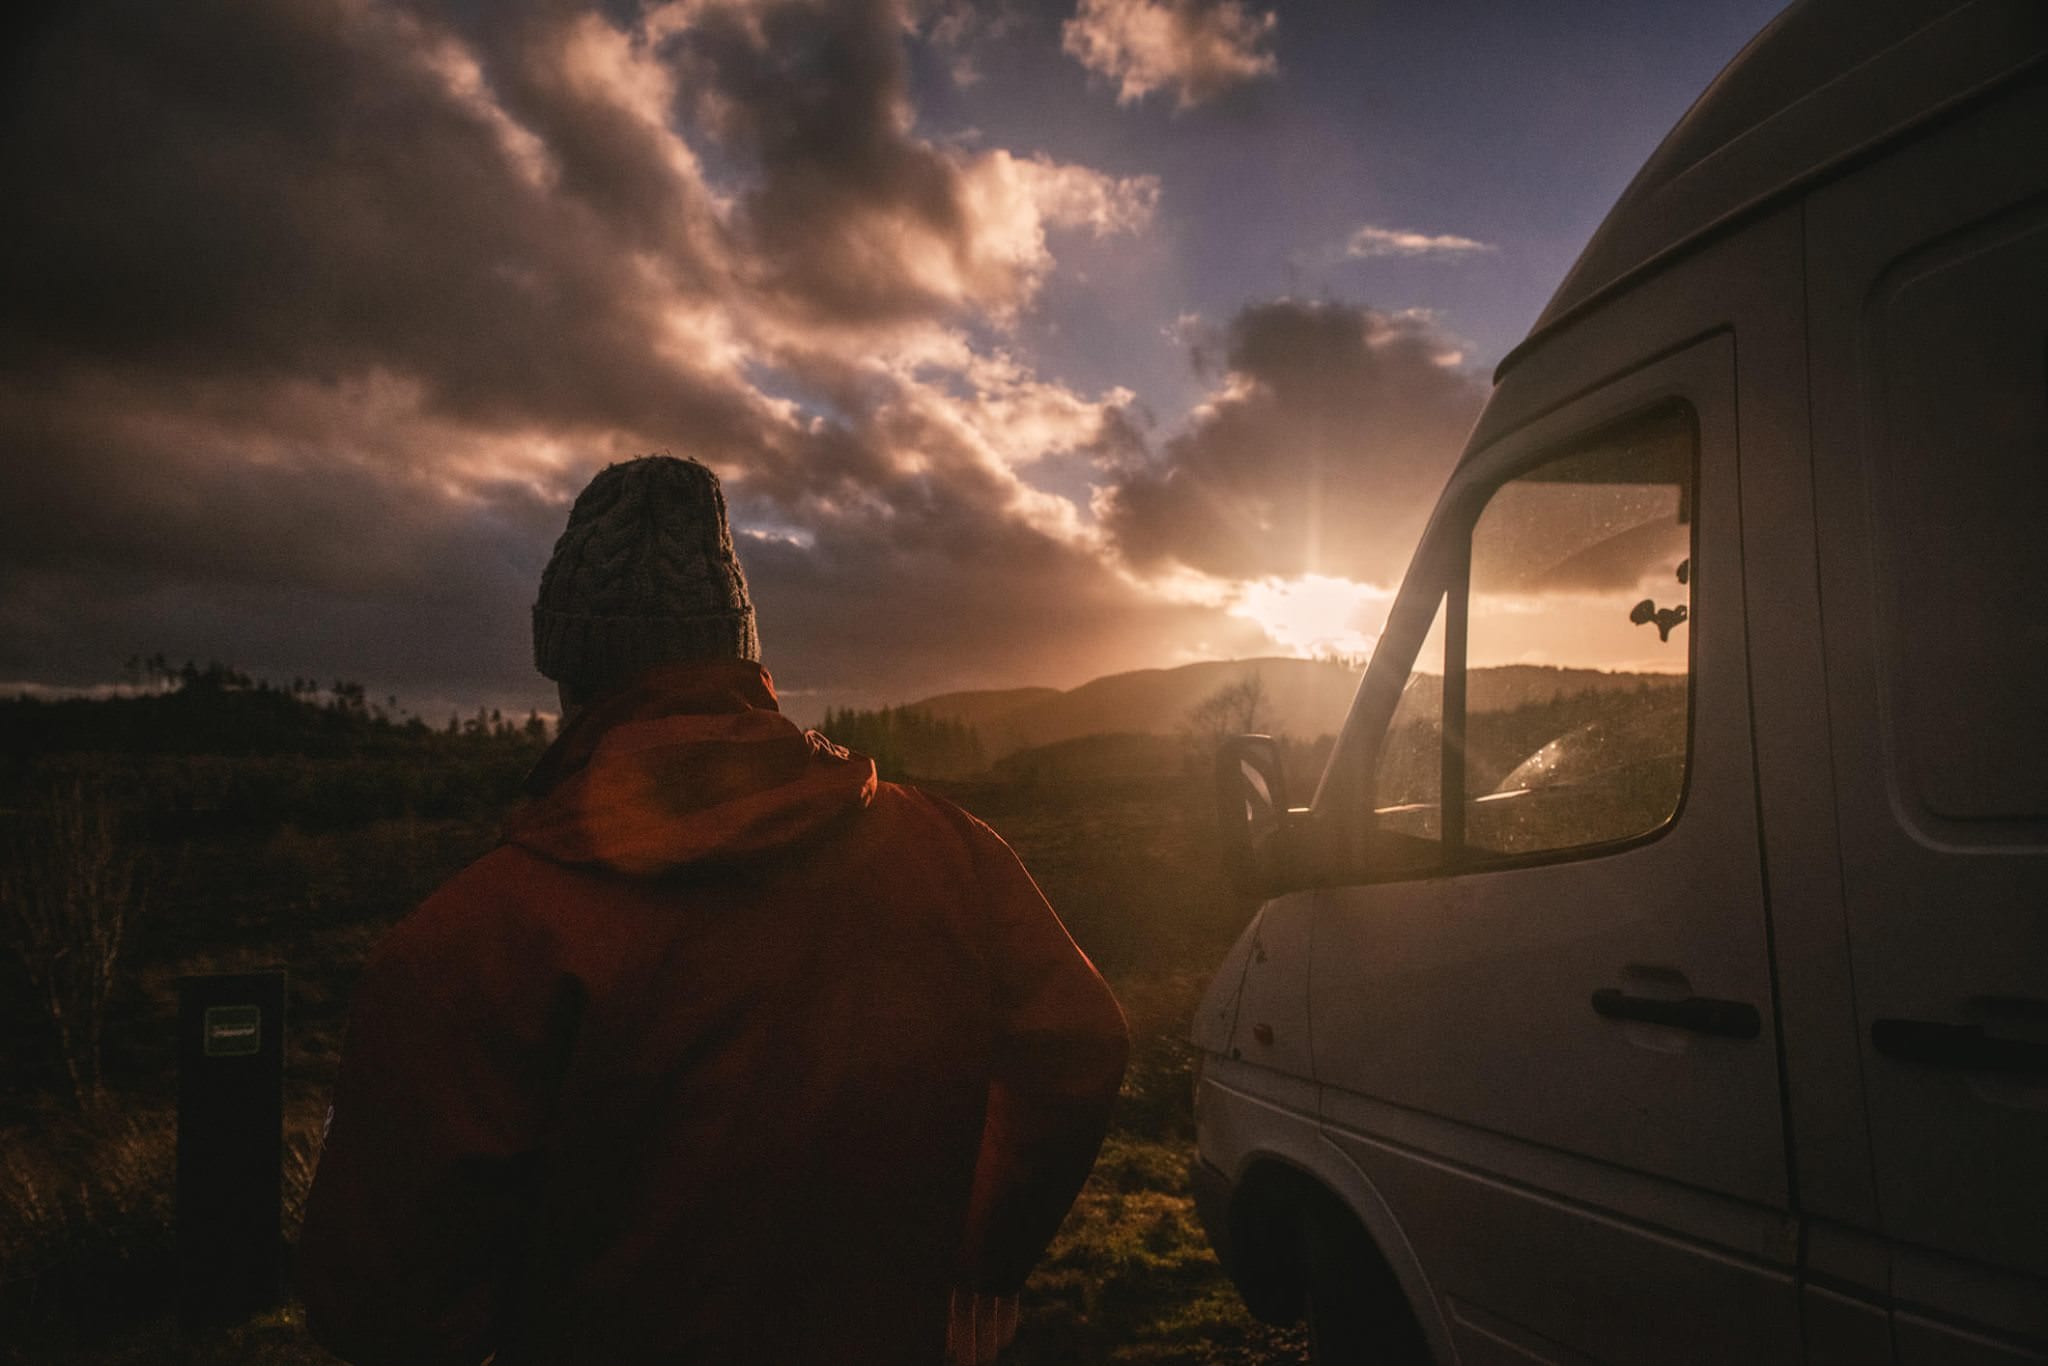 A man with his campervan as the sun sets